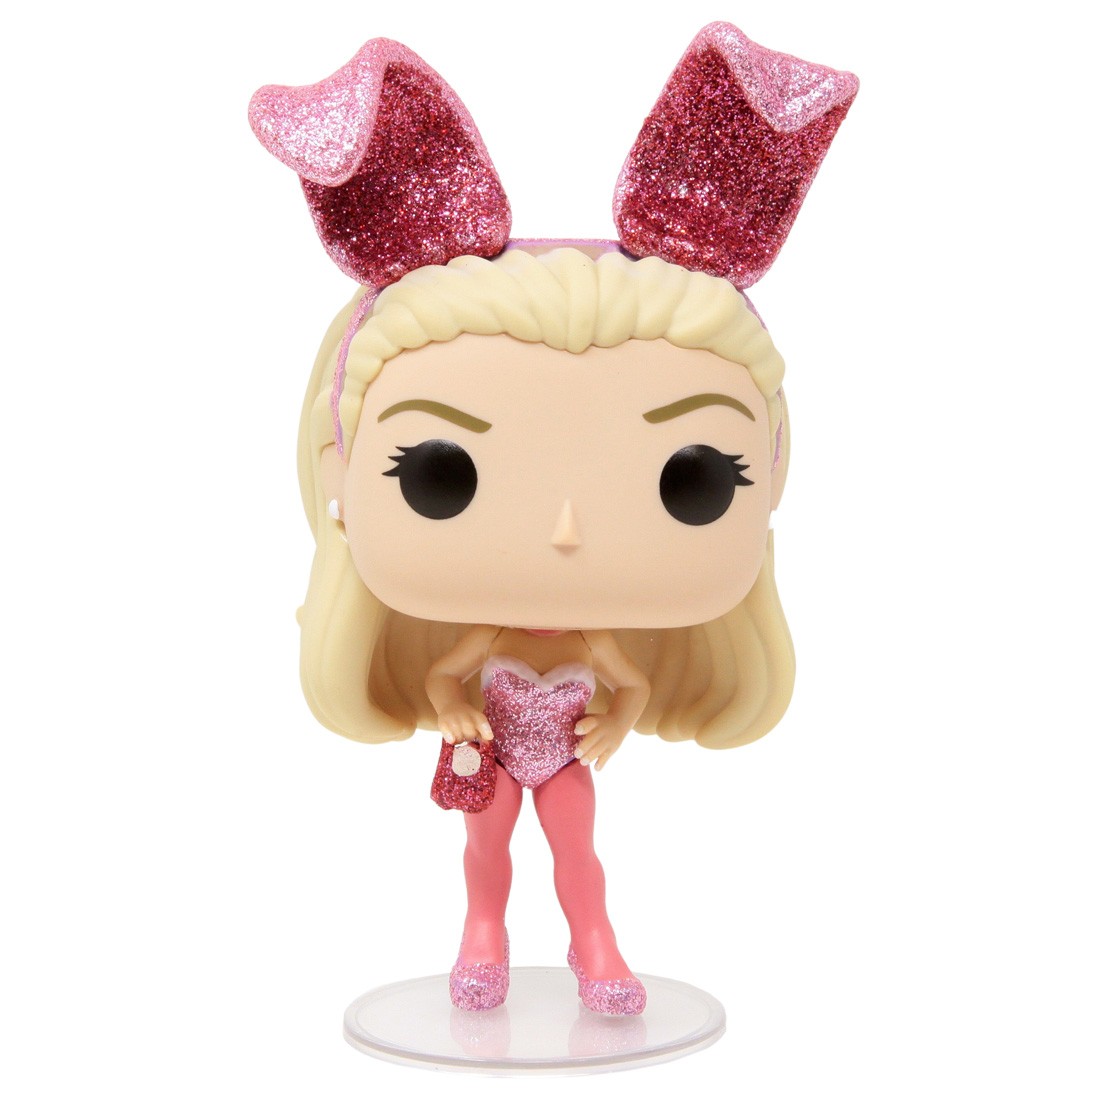 Funko POP Movies Legally Blonde - Elle Woods Bunny Diamond Glitter Entertainment Earth Exclusive (pink)